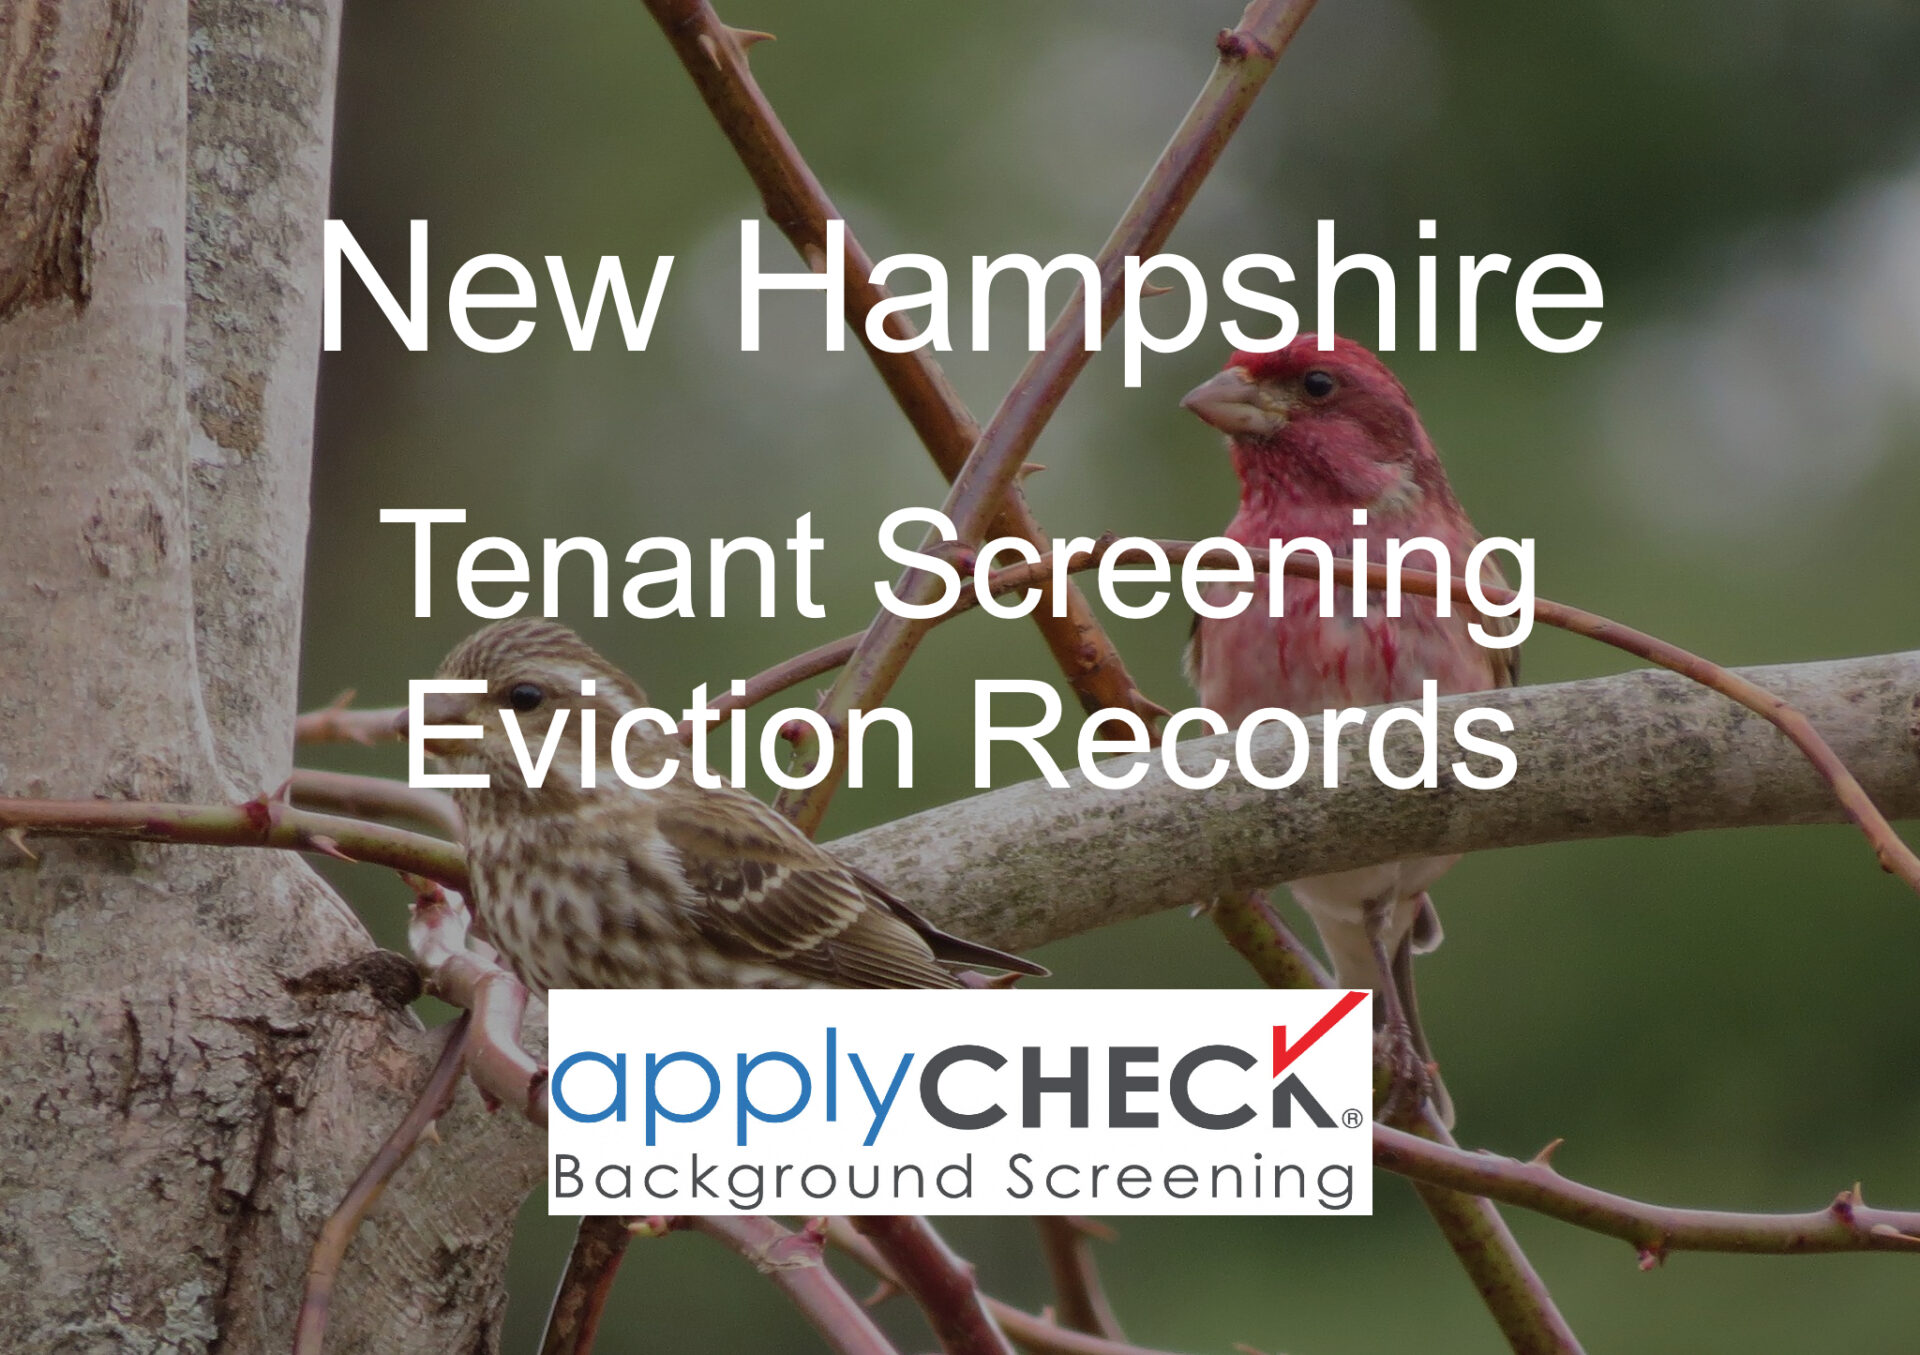 New Hampshire Tenant Screening and Eviction image